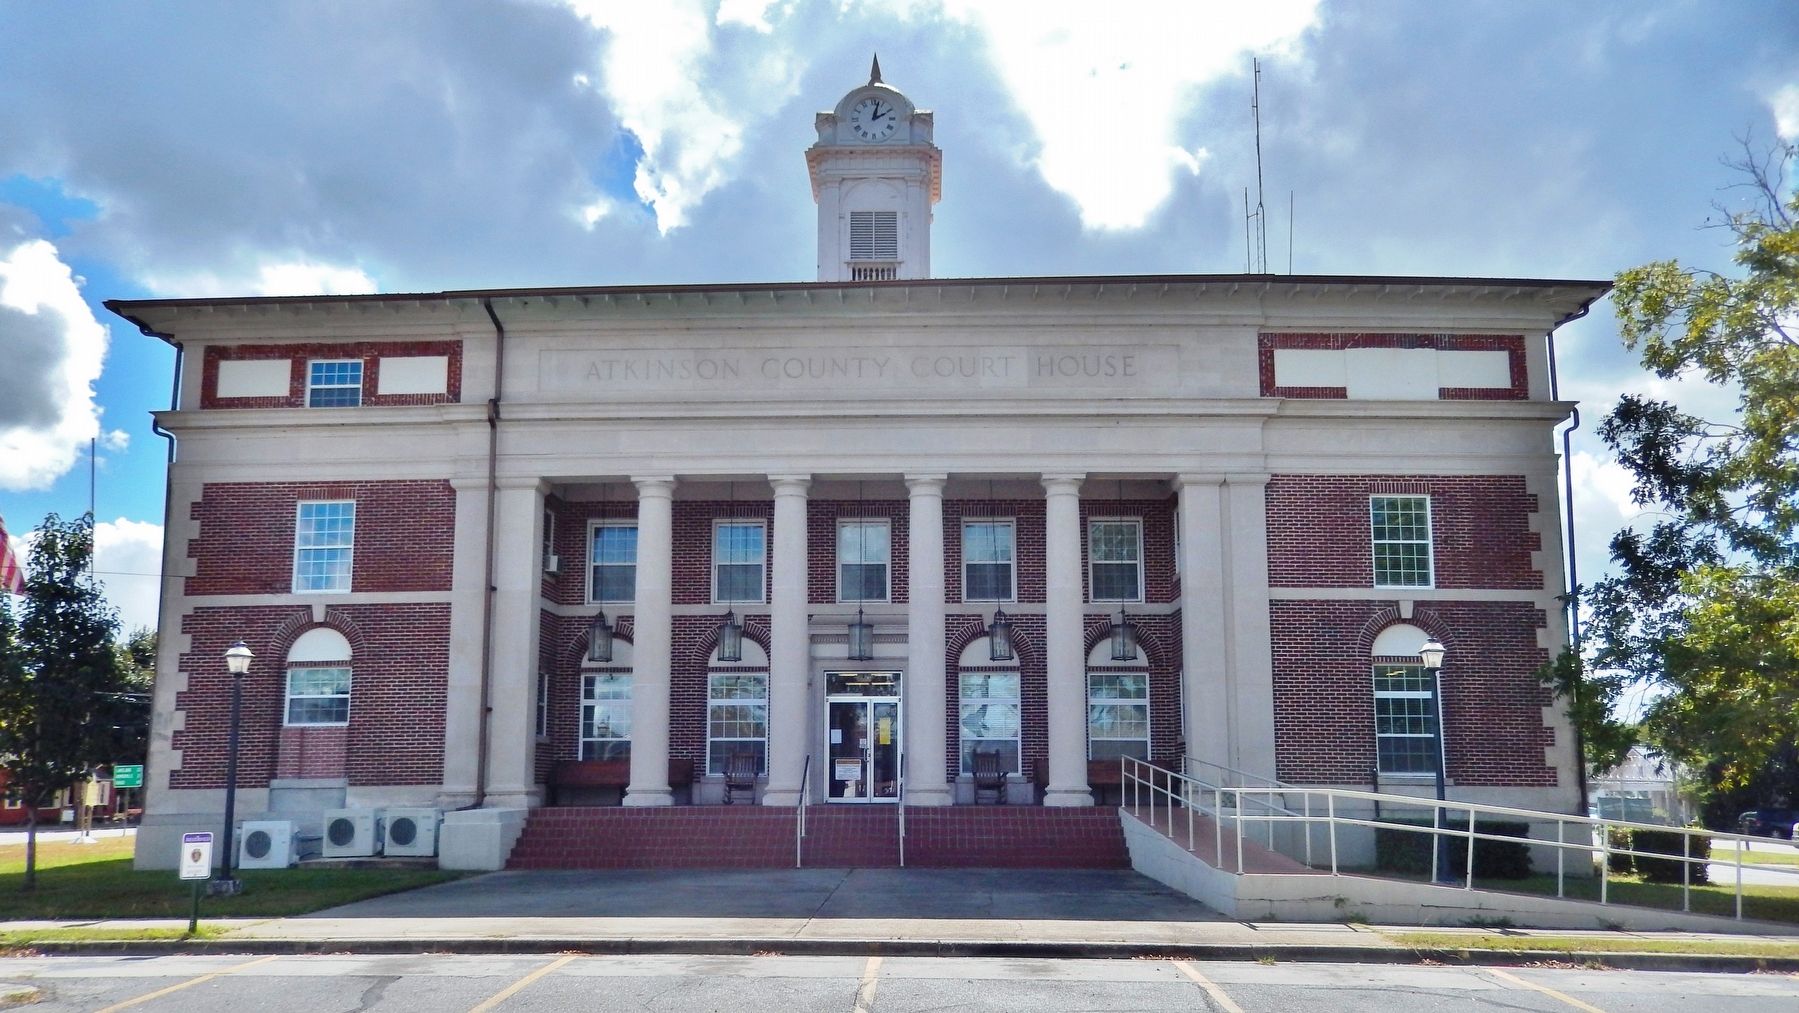 Atkinson County Courthouse (<i>north/front elevation</i>) image. Click for full size.